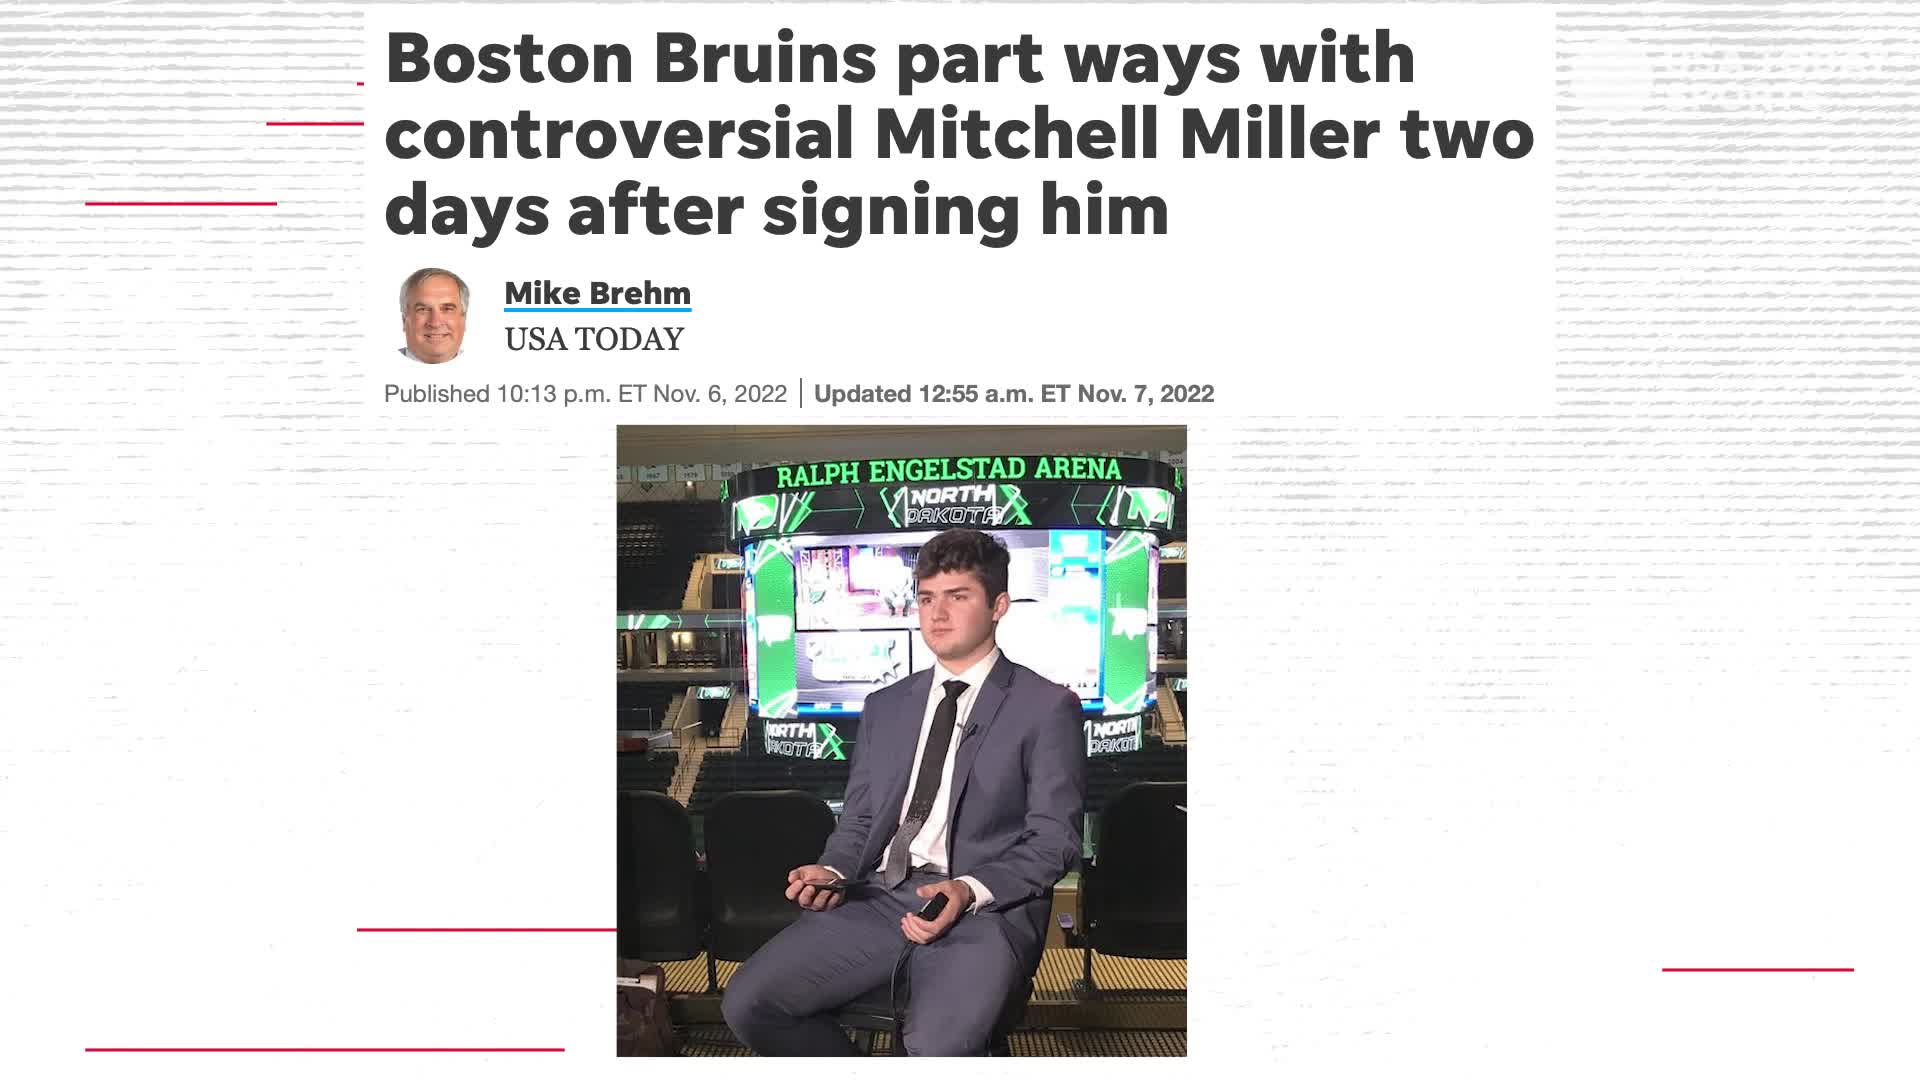 Bruins cut ties with Mitchell Miller, who bullied Black classmate